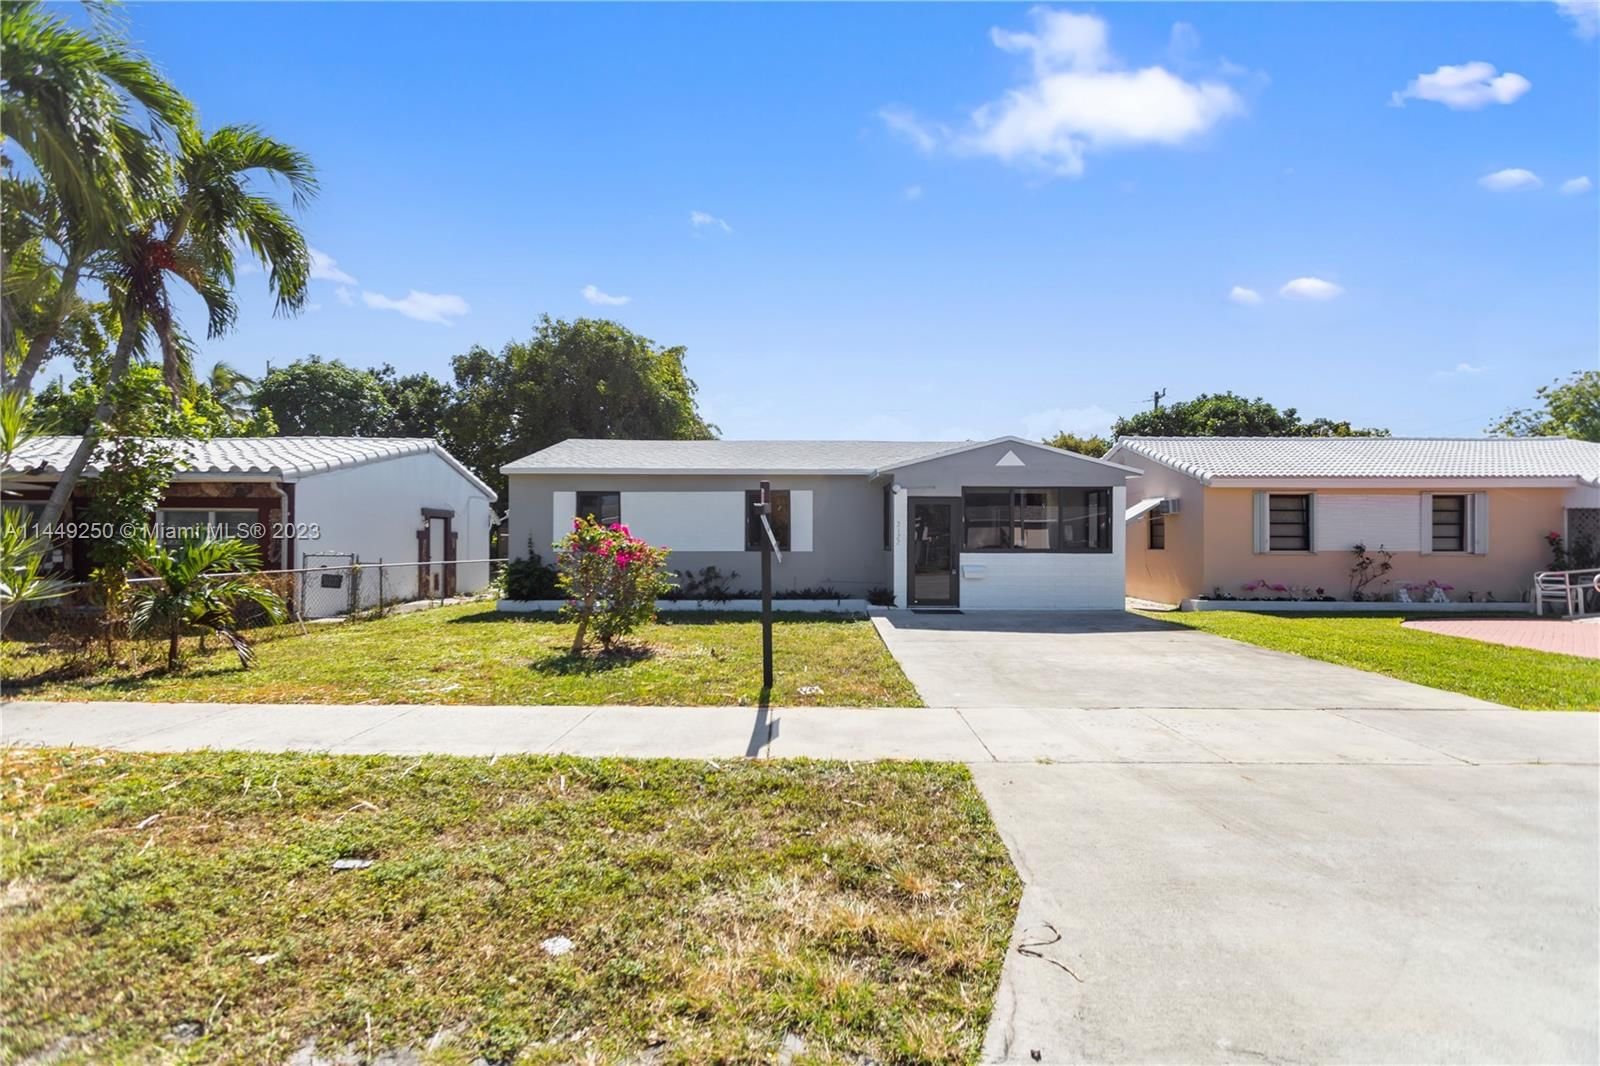 Real estate property located at 2122 Taft St, Broward County, Hollywood, FL